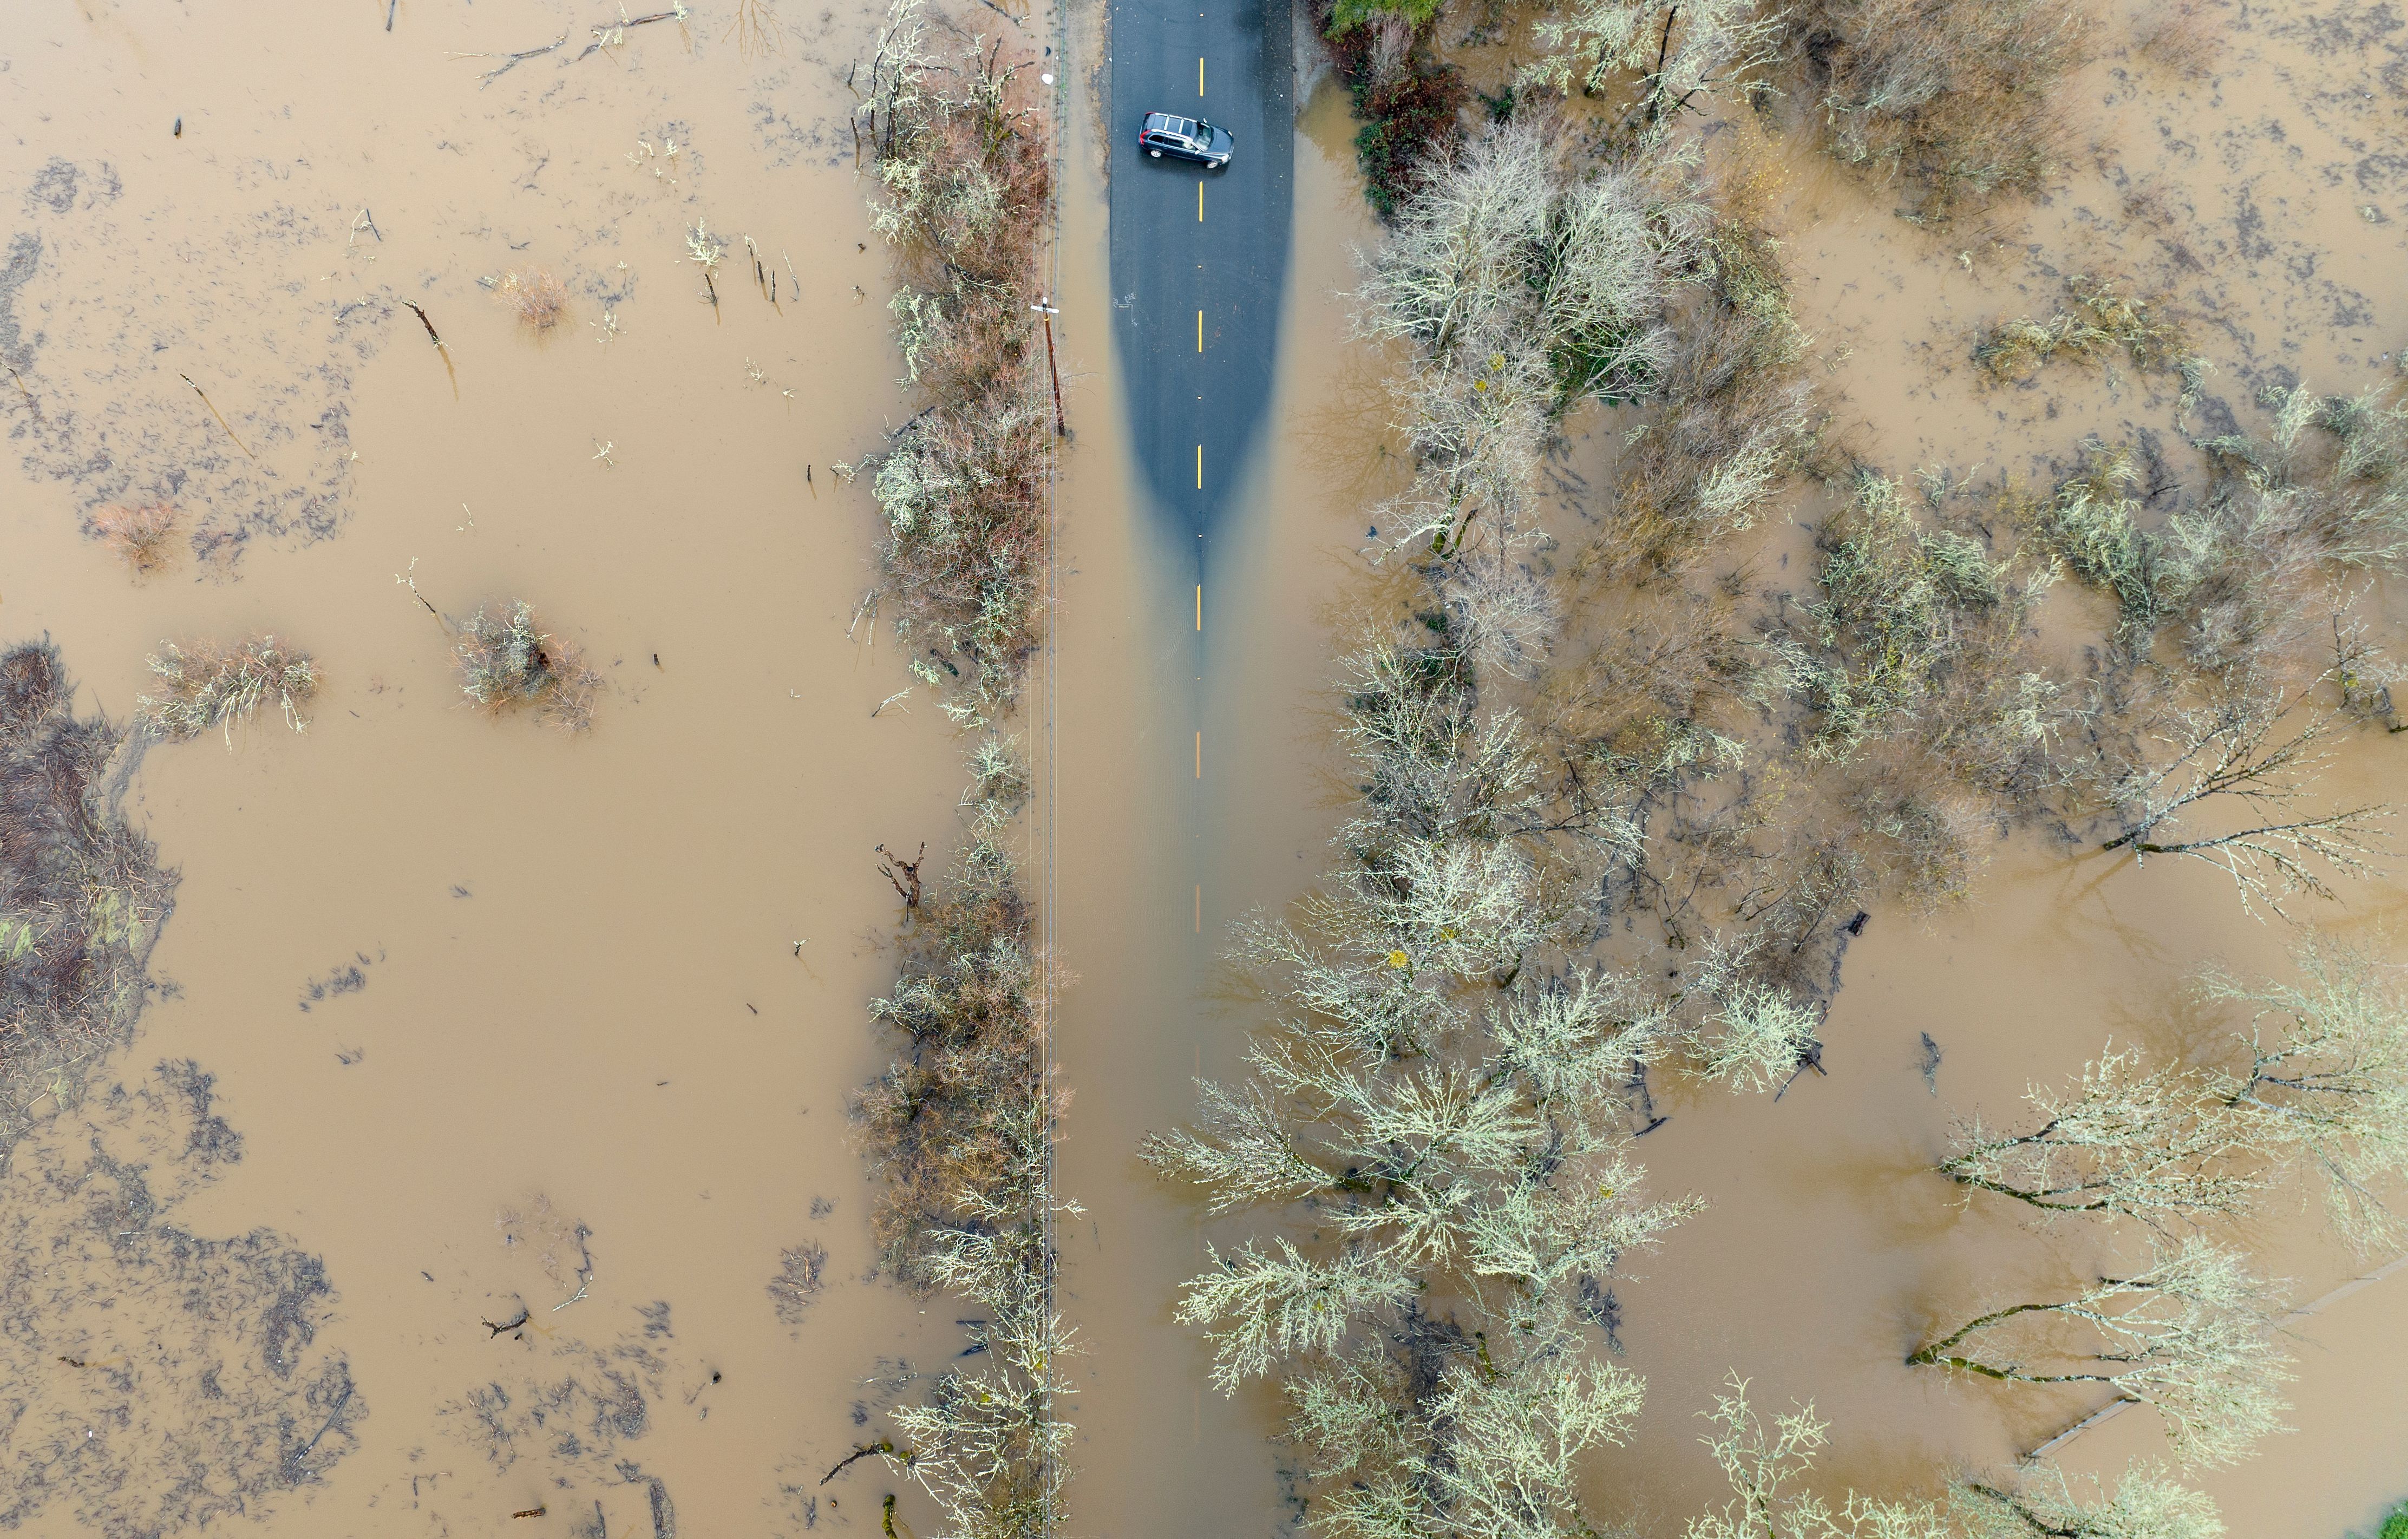  A vehicle turns around on a flooded road in Sebastopol, California, on January 05.